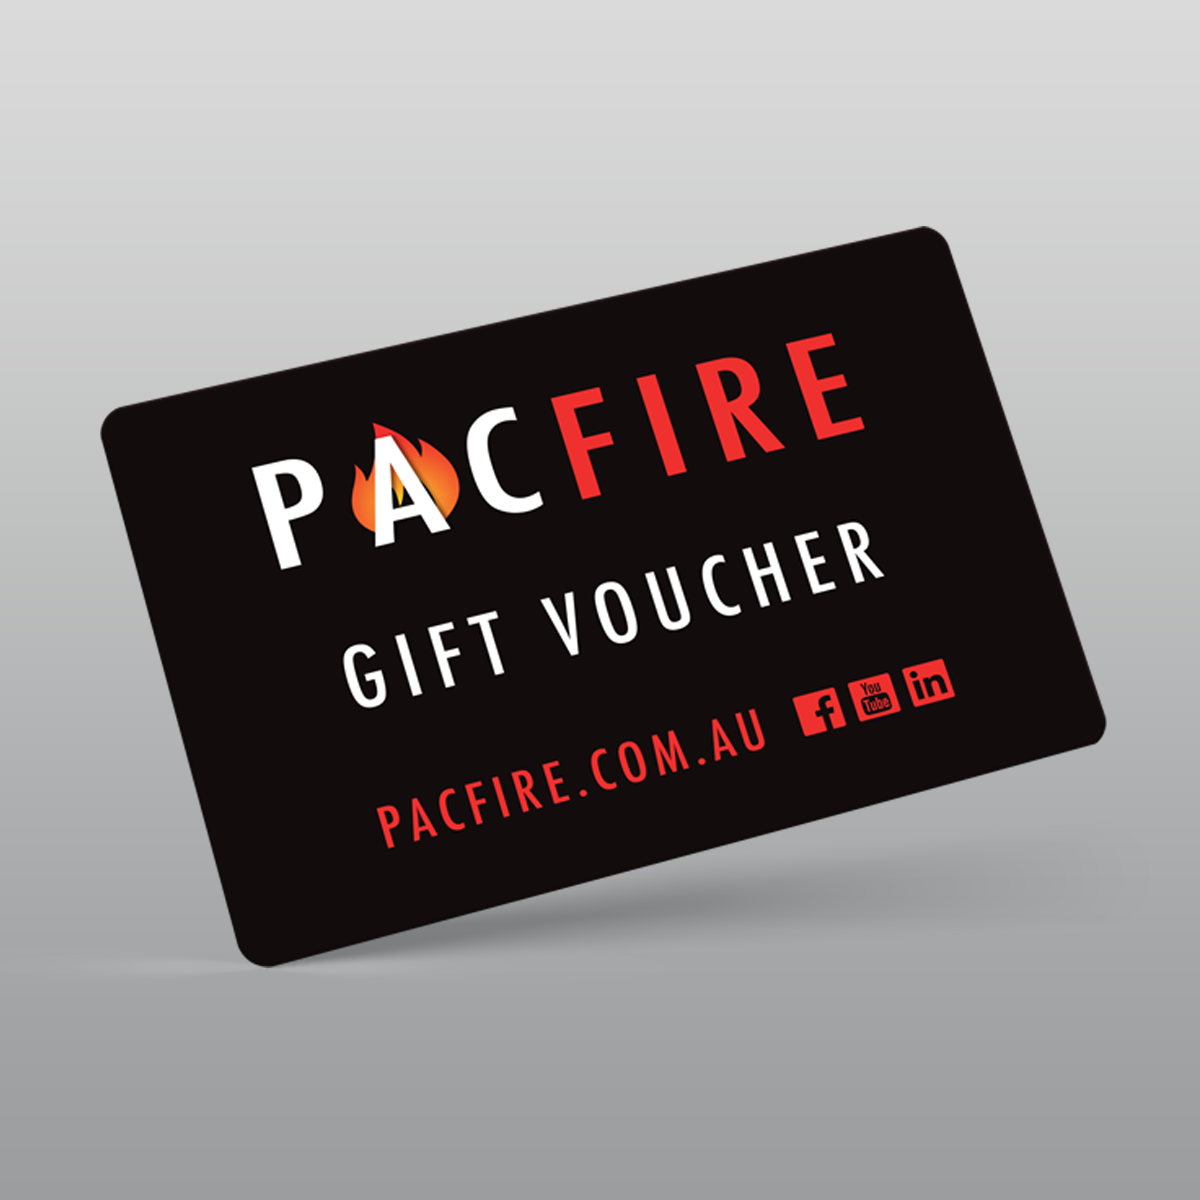 Pac Fire Online Gift Vouchers - Available Now!